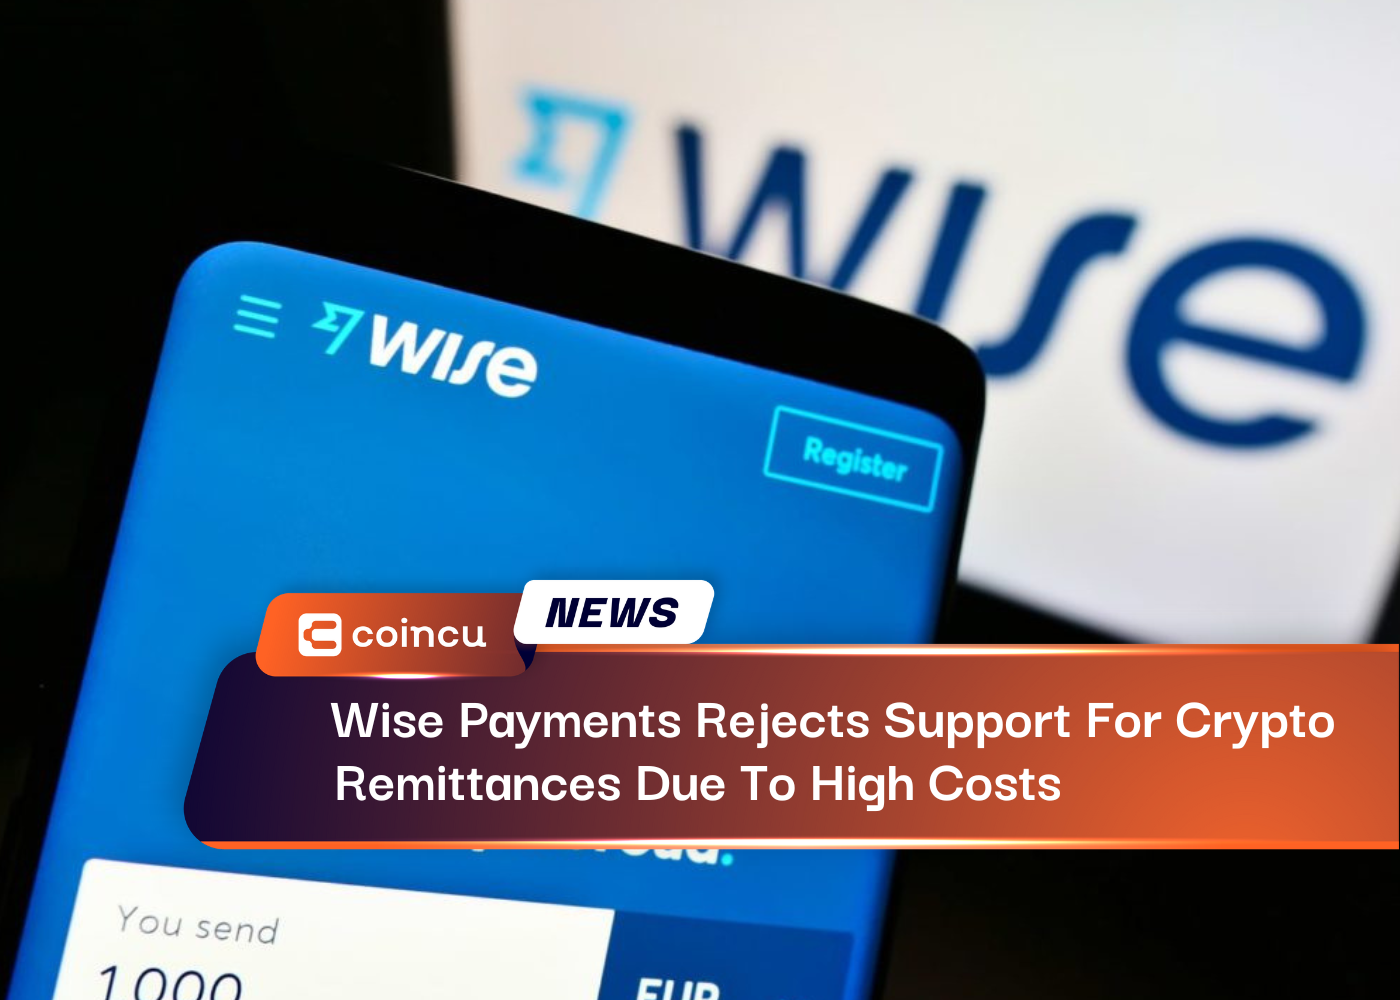 Wise Payments Rejects Support For Crypto